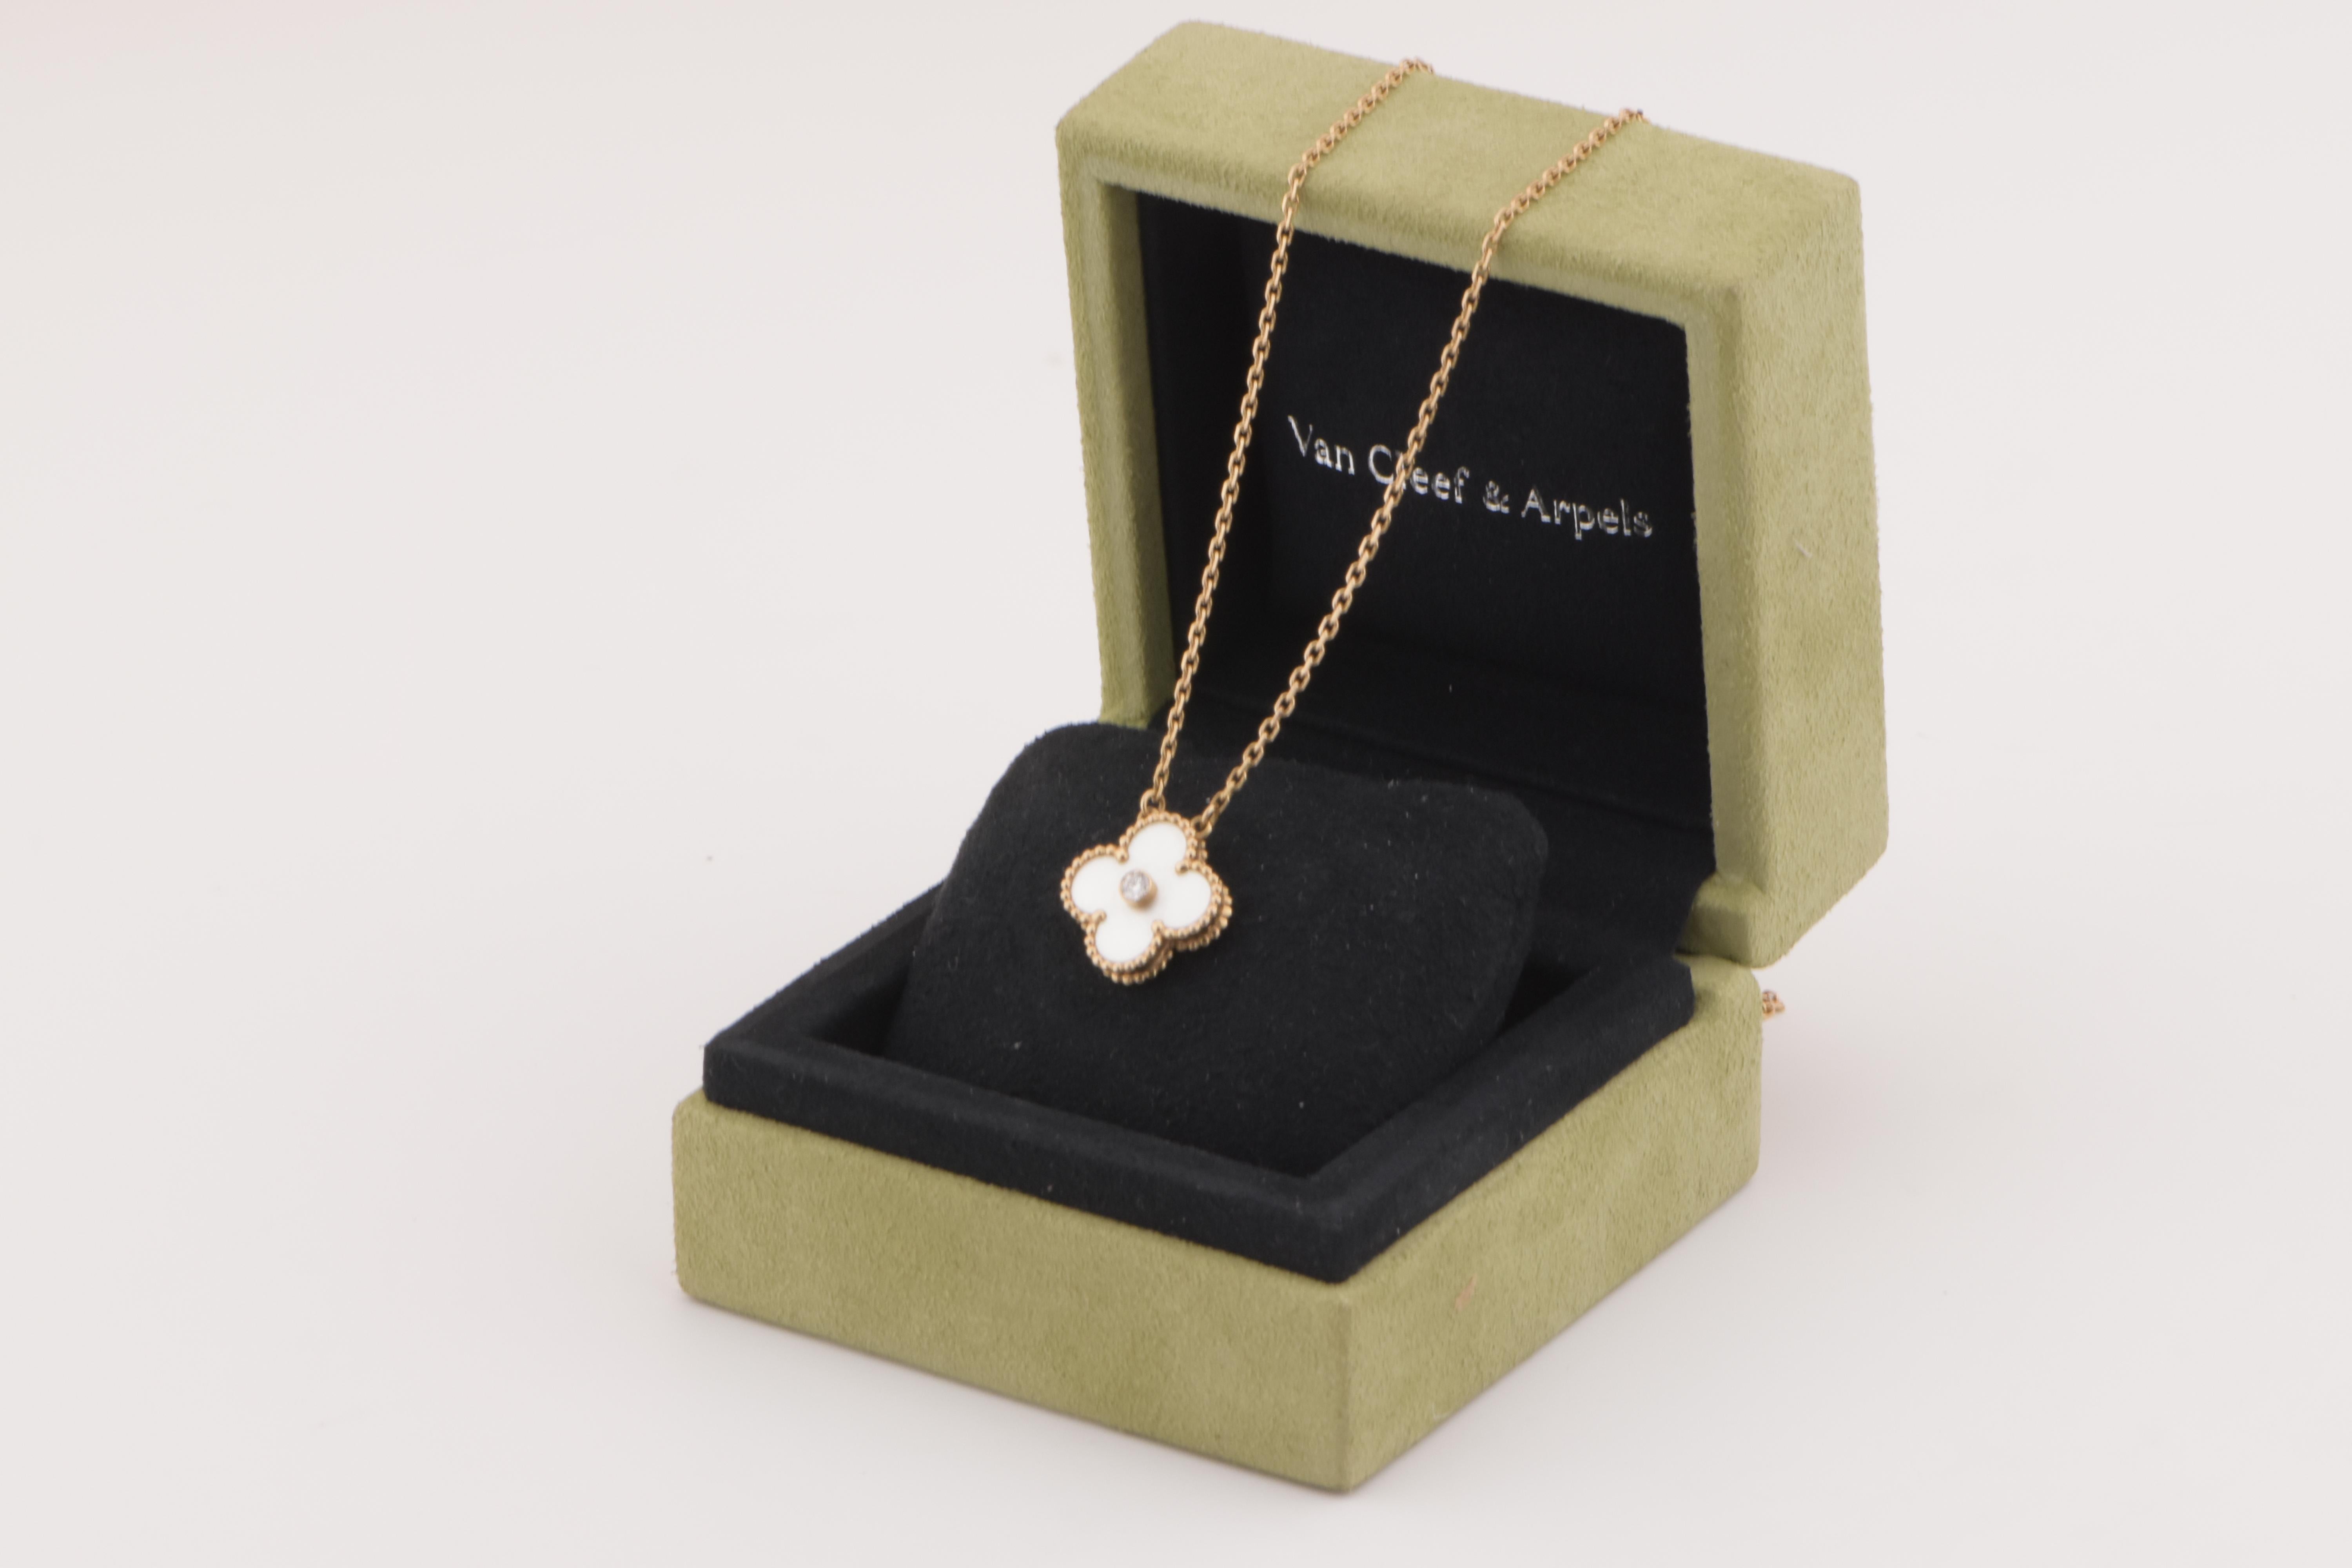 18k Rose Gold Limited Edition Mother Of Pearl Necklace was released in 2012 Christmas as the holiday pendant. VCA doesn't create this version anymore, truly collective piece!

Dandelion Antiques Code AT-0934
Brand Van Cleef & Arpels
Model 2012